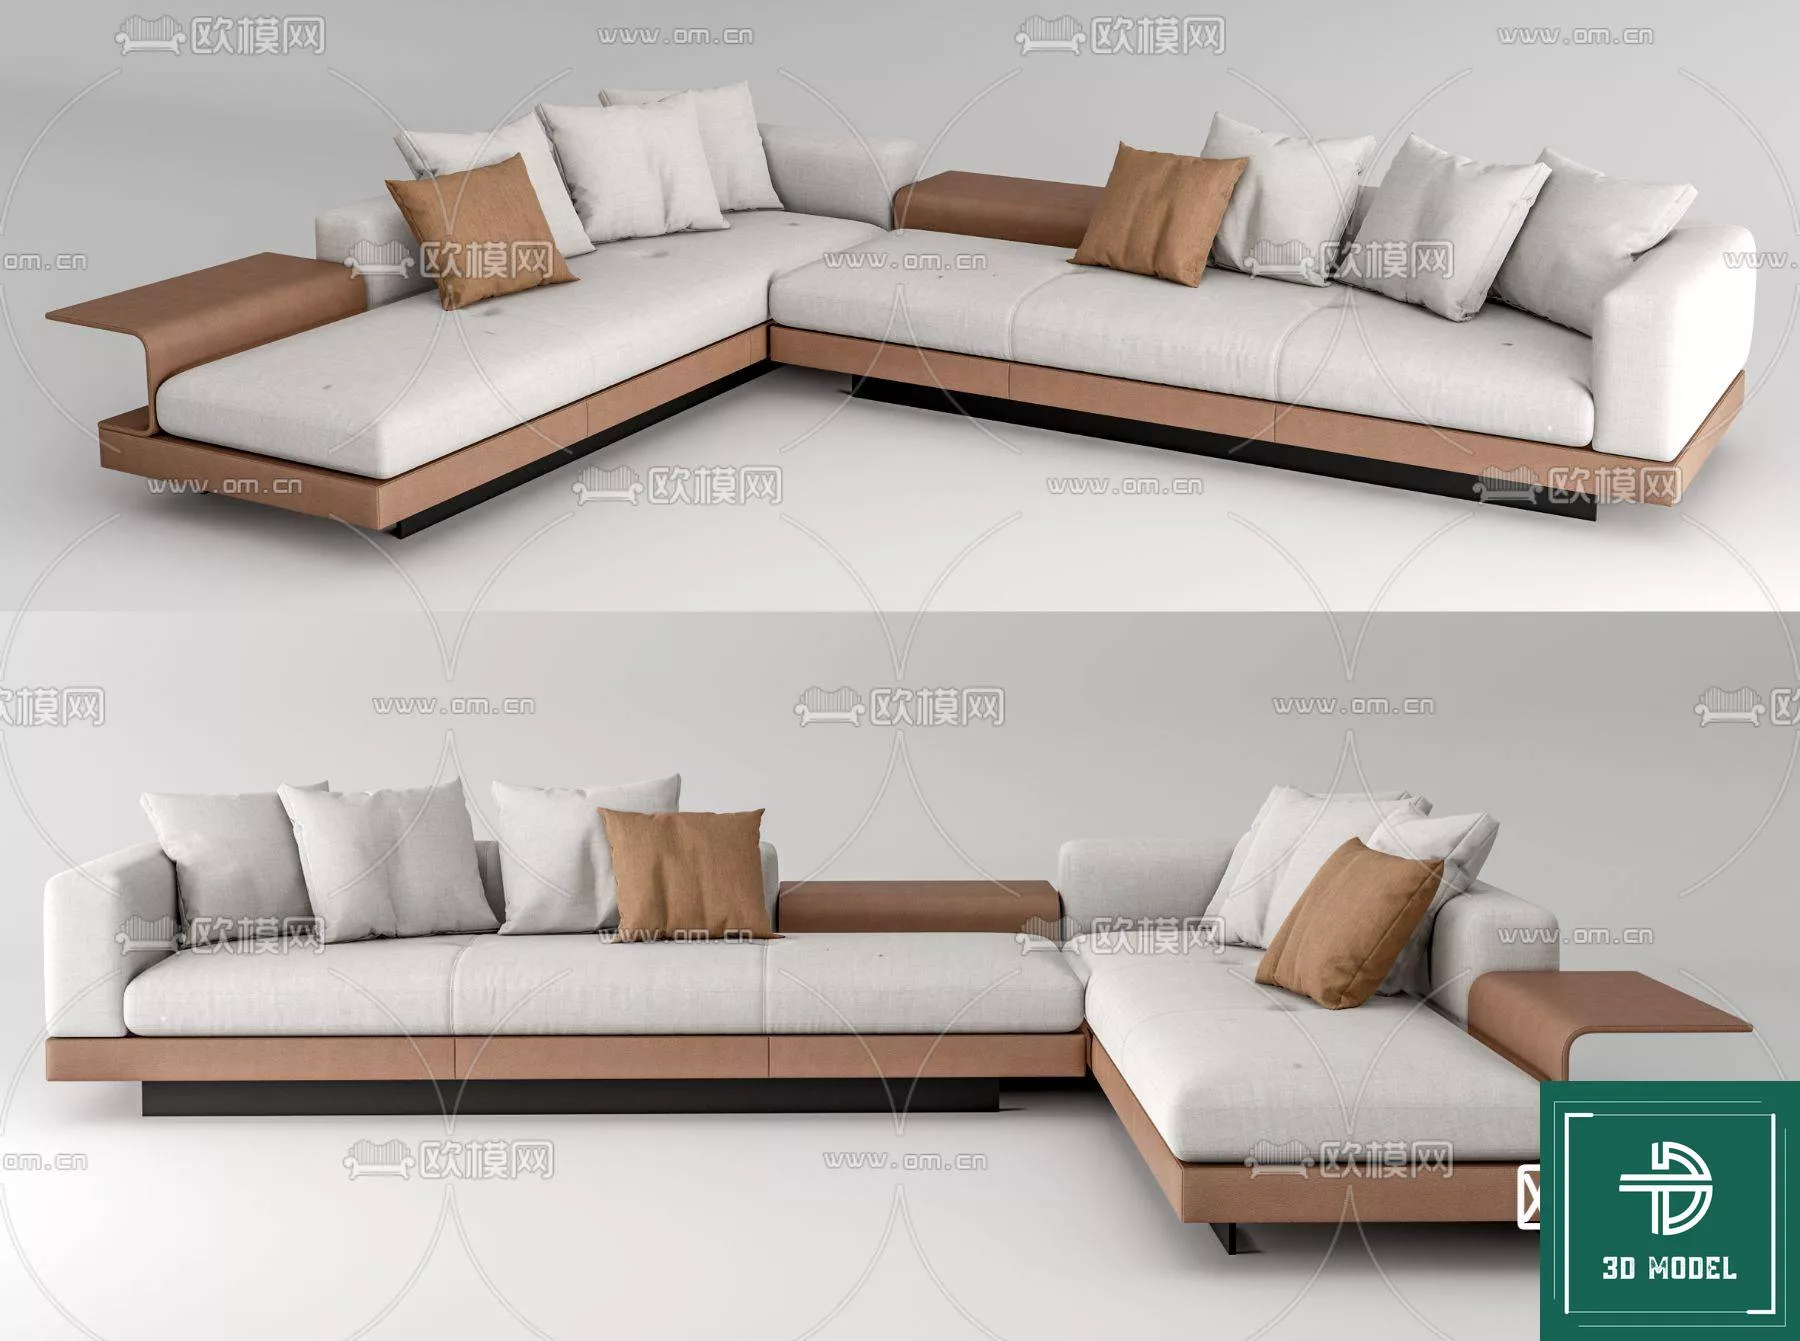 MODERN SOFA - SKETCHUP 3D MODEL - VRAY OR ENSCAPE - ID13288